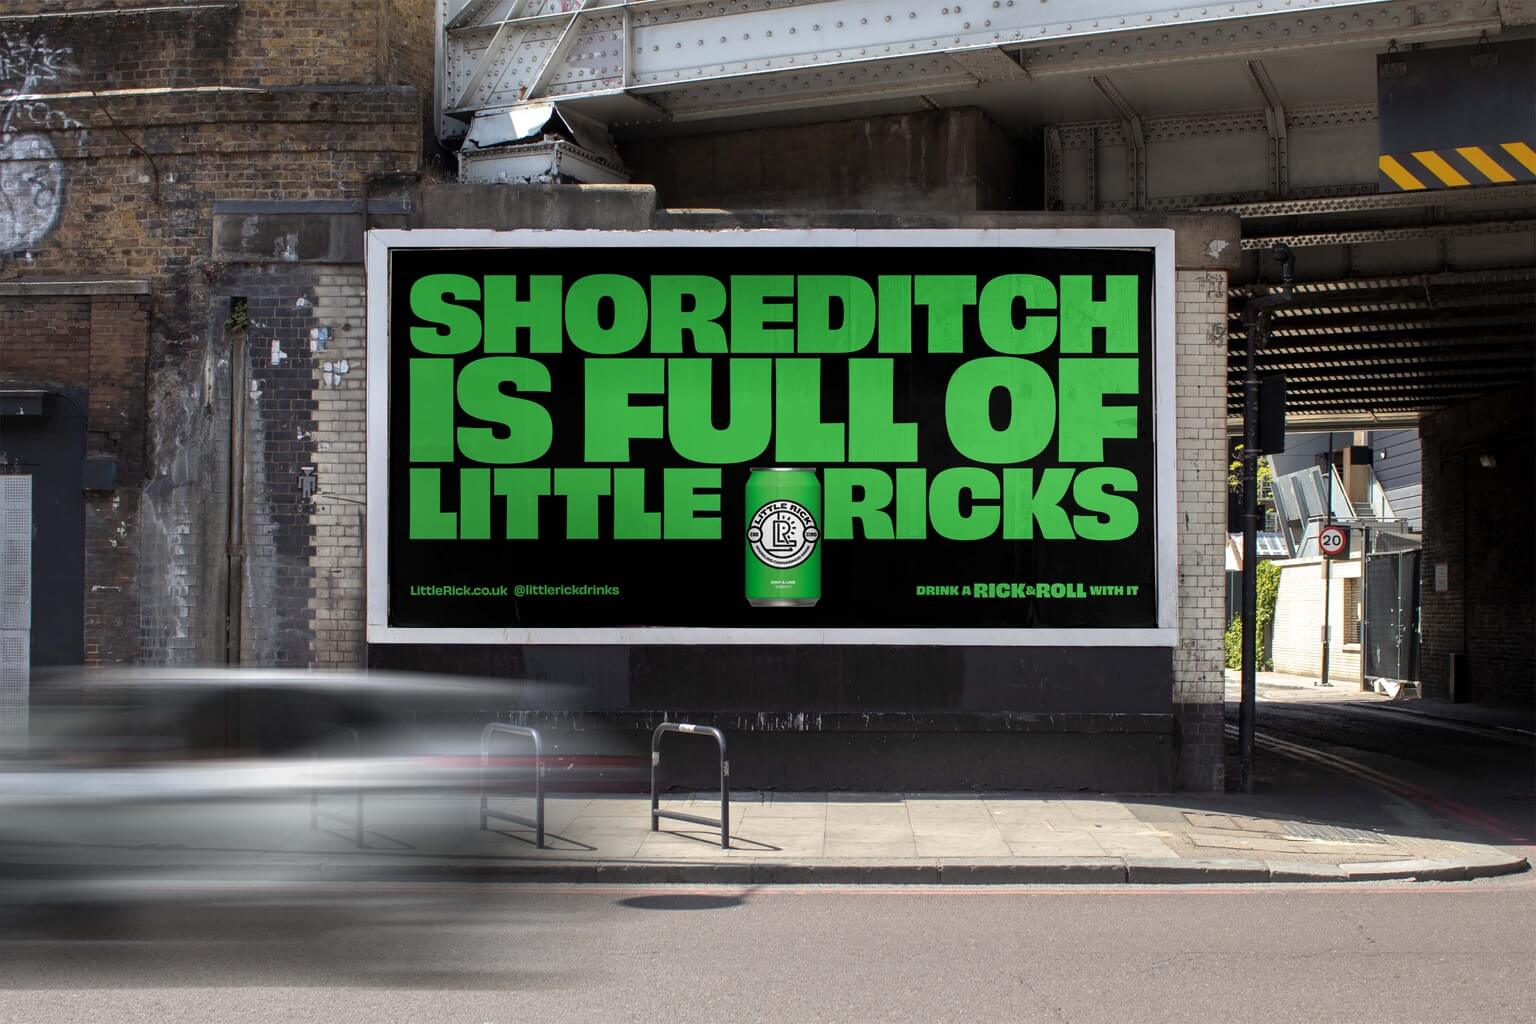 Little Rick Shoreditch Poster by Now, London Advertising agency